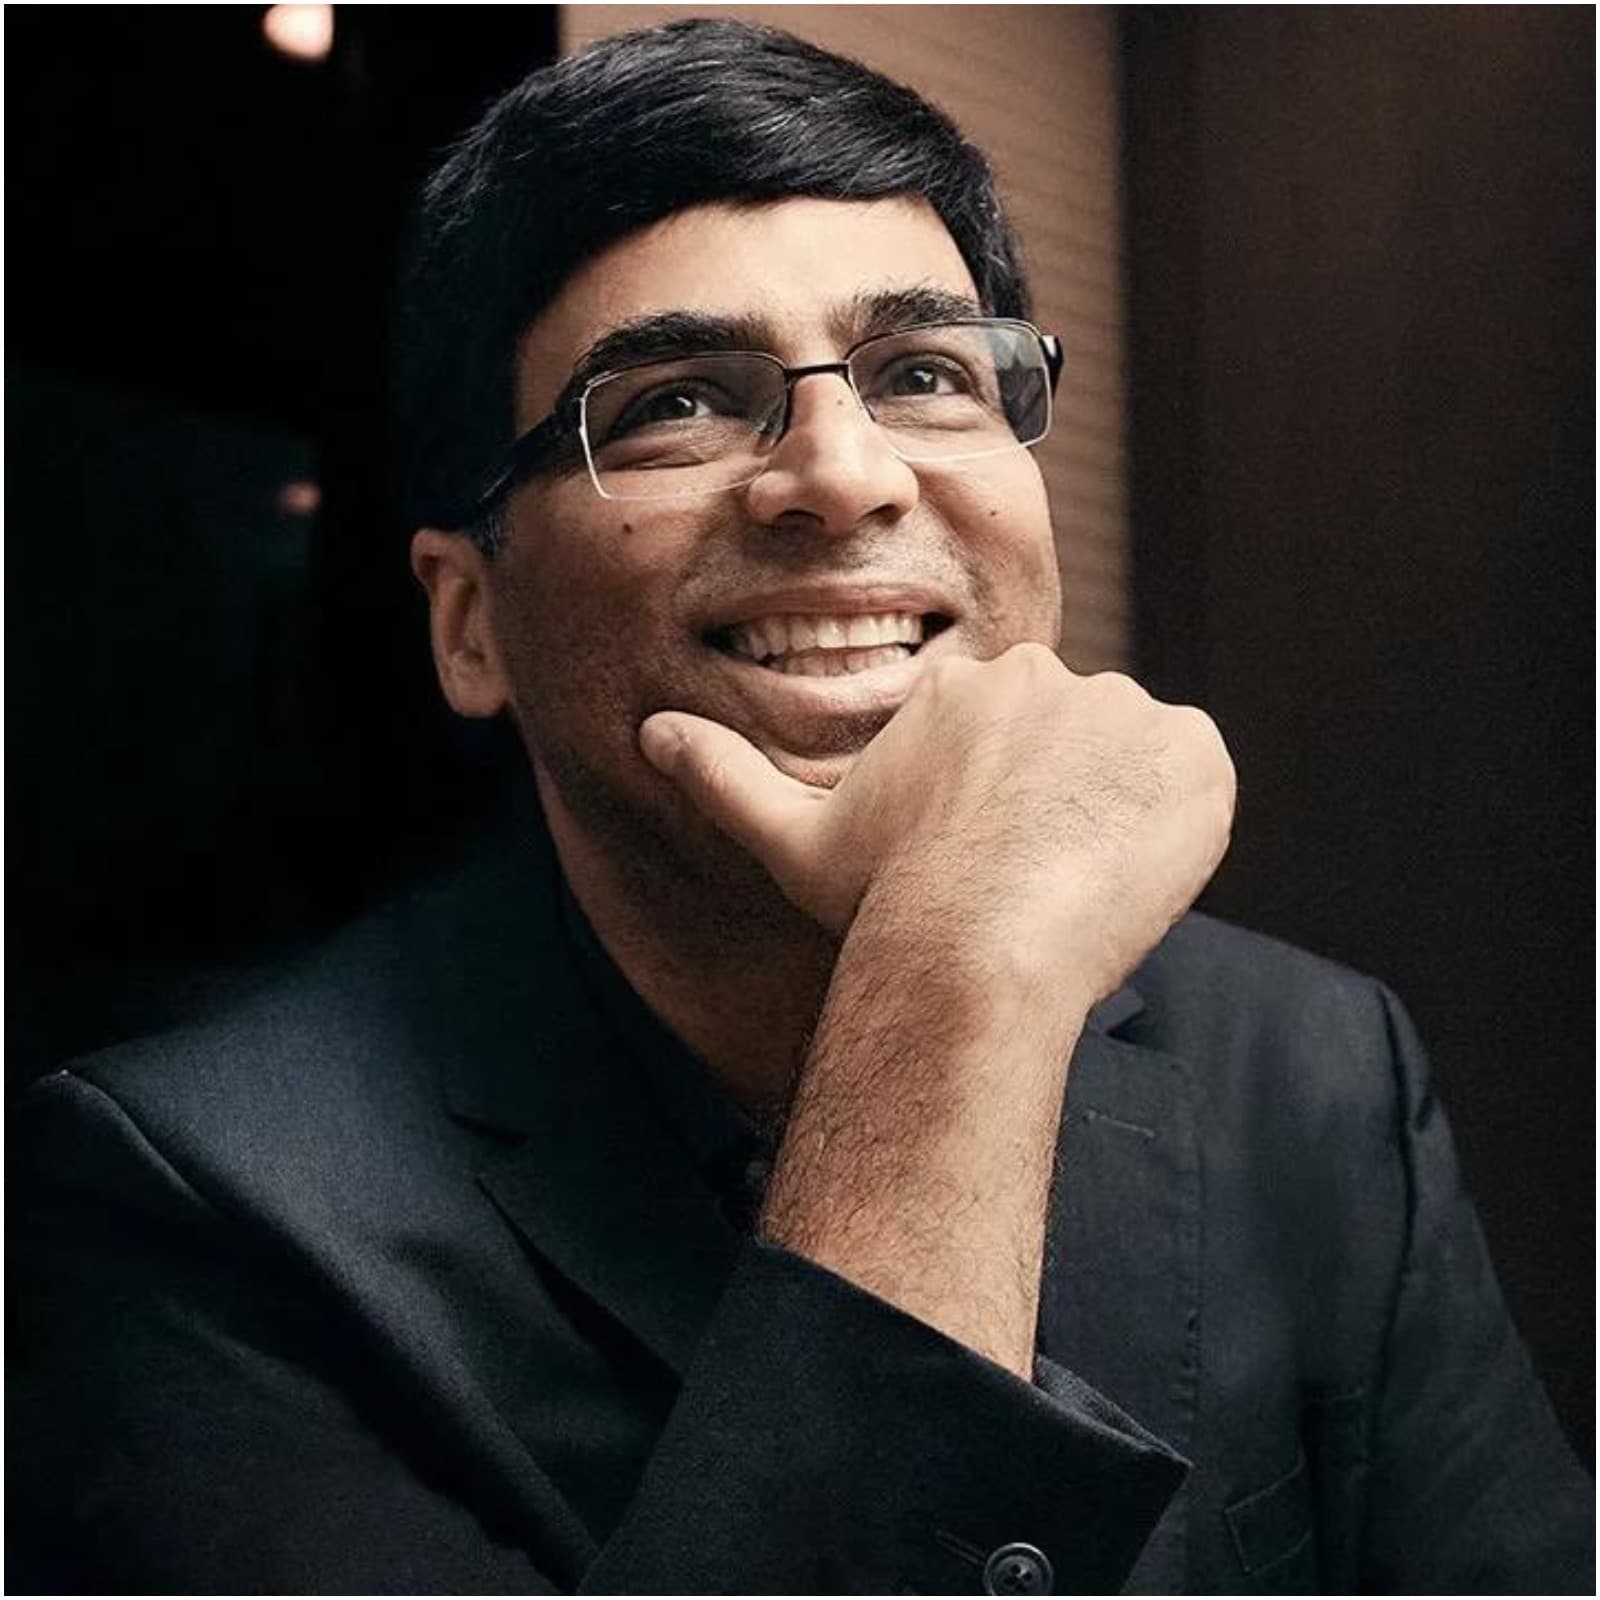 Anand is chosen as the Fide vice-president, and Arkady is re-elected.